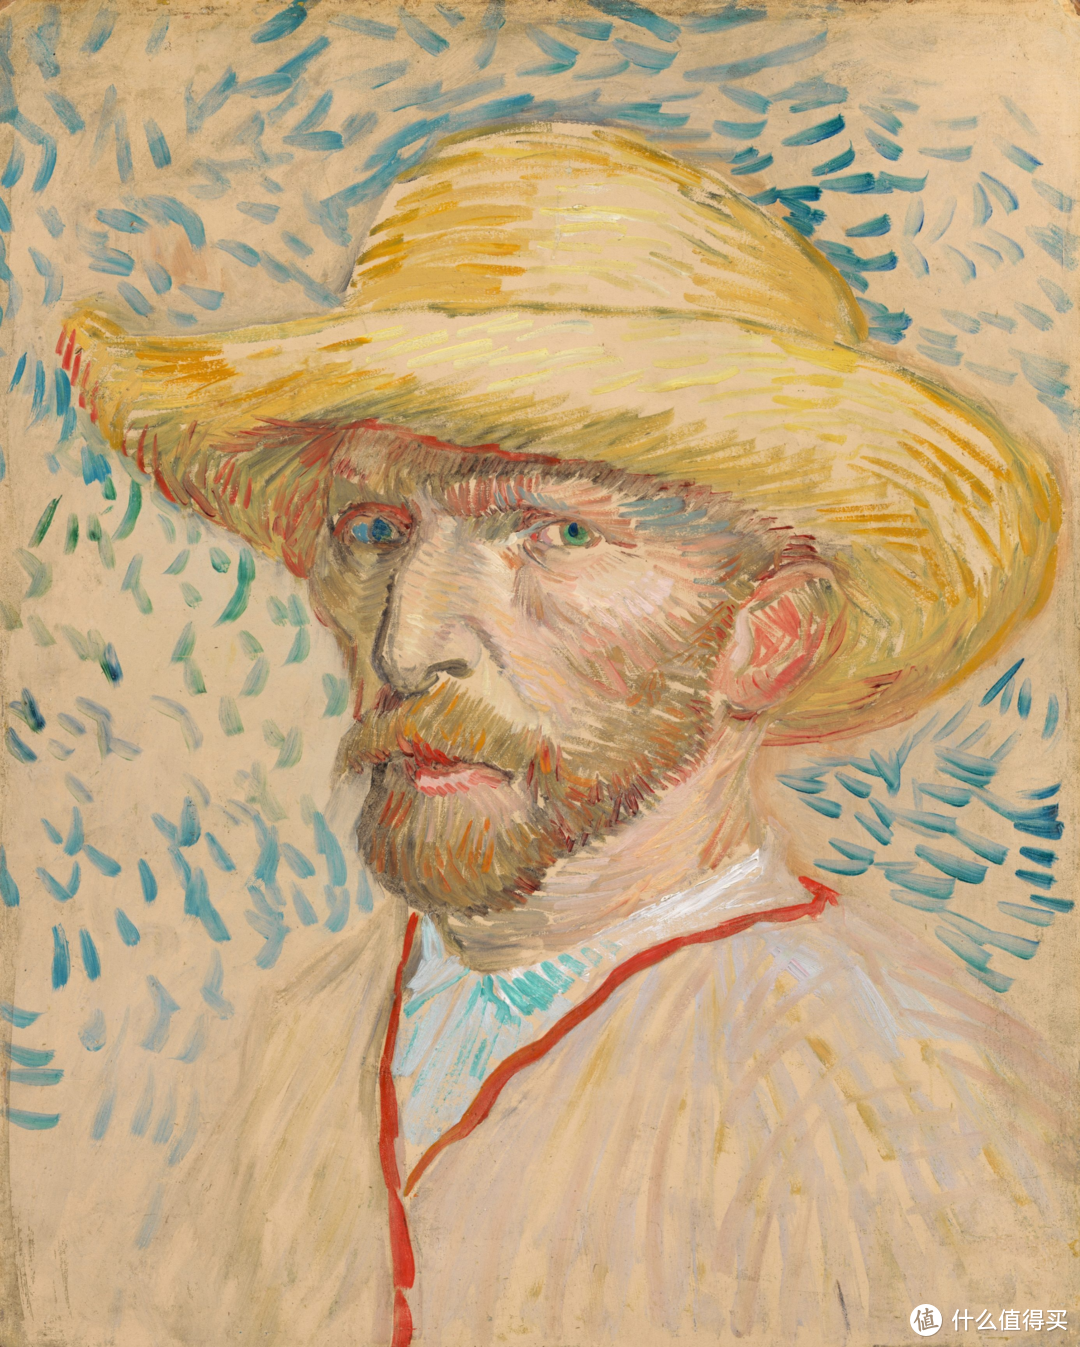 Self-Portrait with Straw Hat by Vincent van Gogh